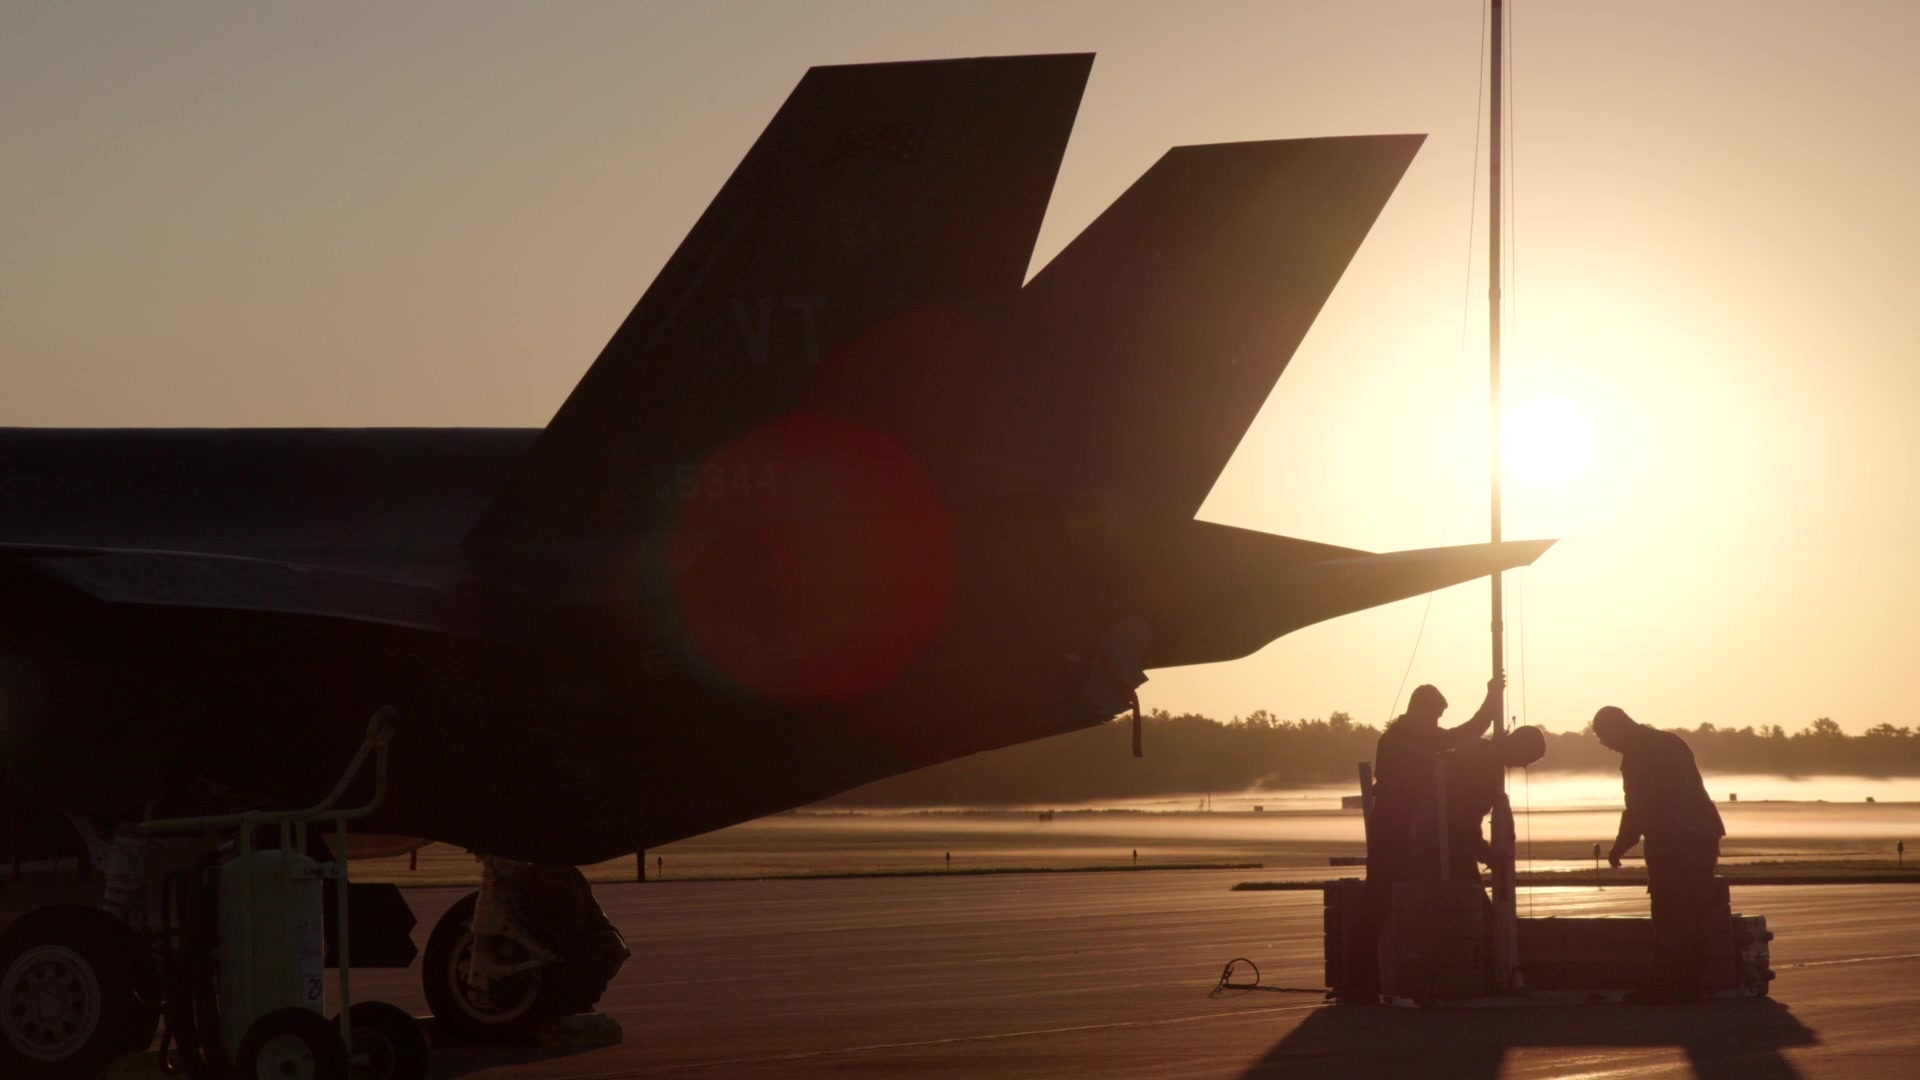 The 158th Fighter Wing recently came back from the  Northern Lightning training exercise at Volk Field Air National Guard Base. We invite you to take an inside look at what the Green Mountain Boys were up to while they were out there!